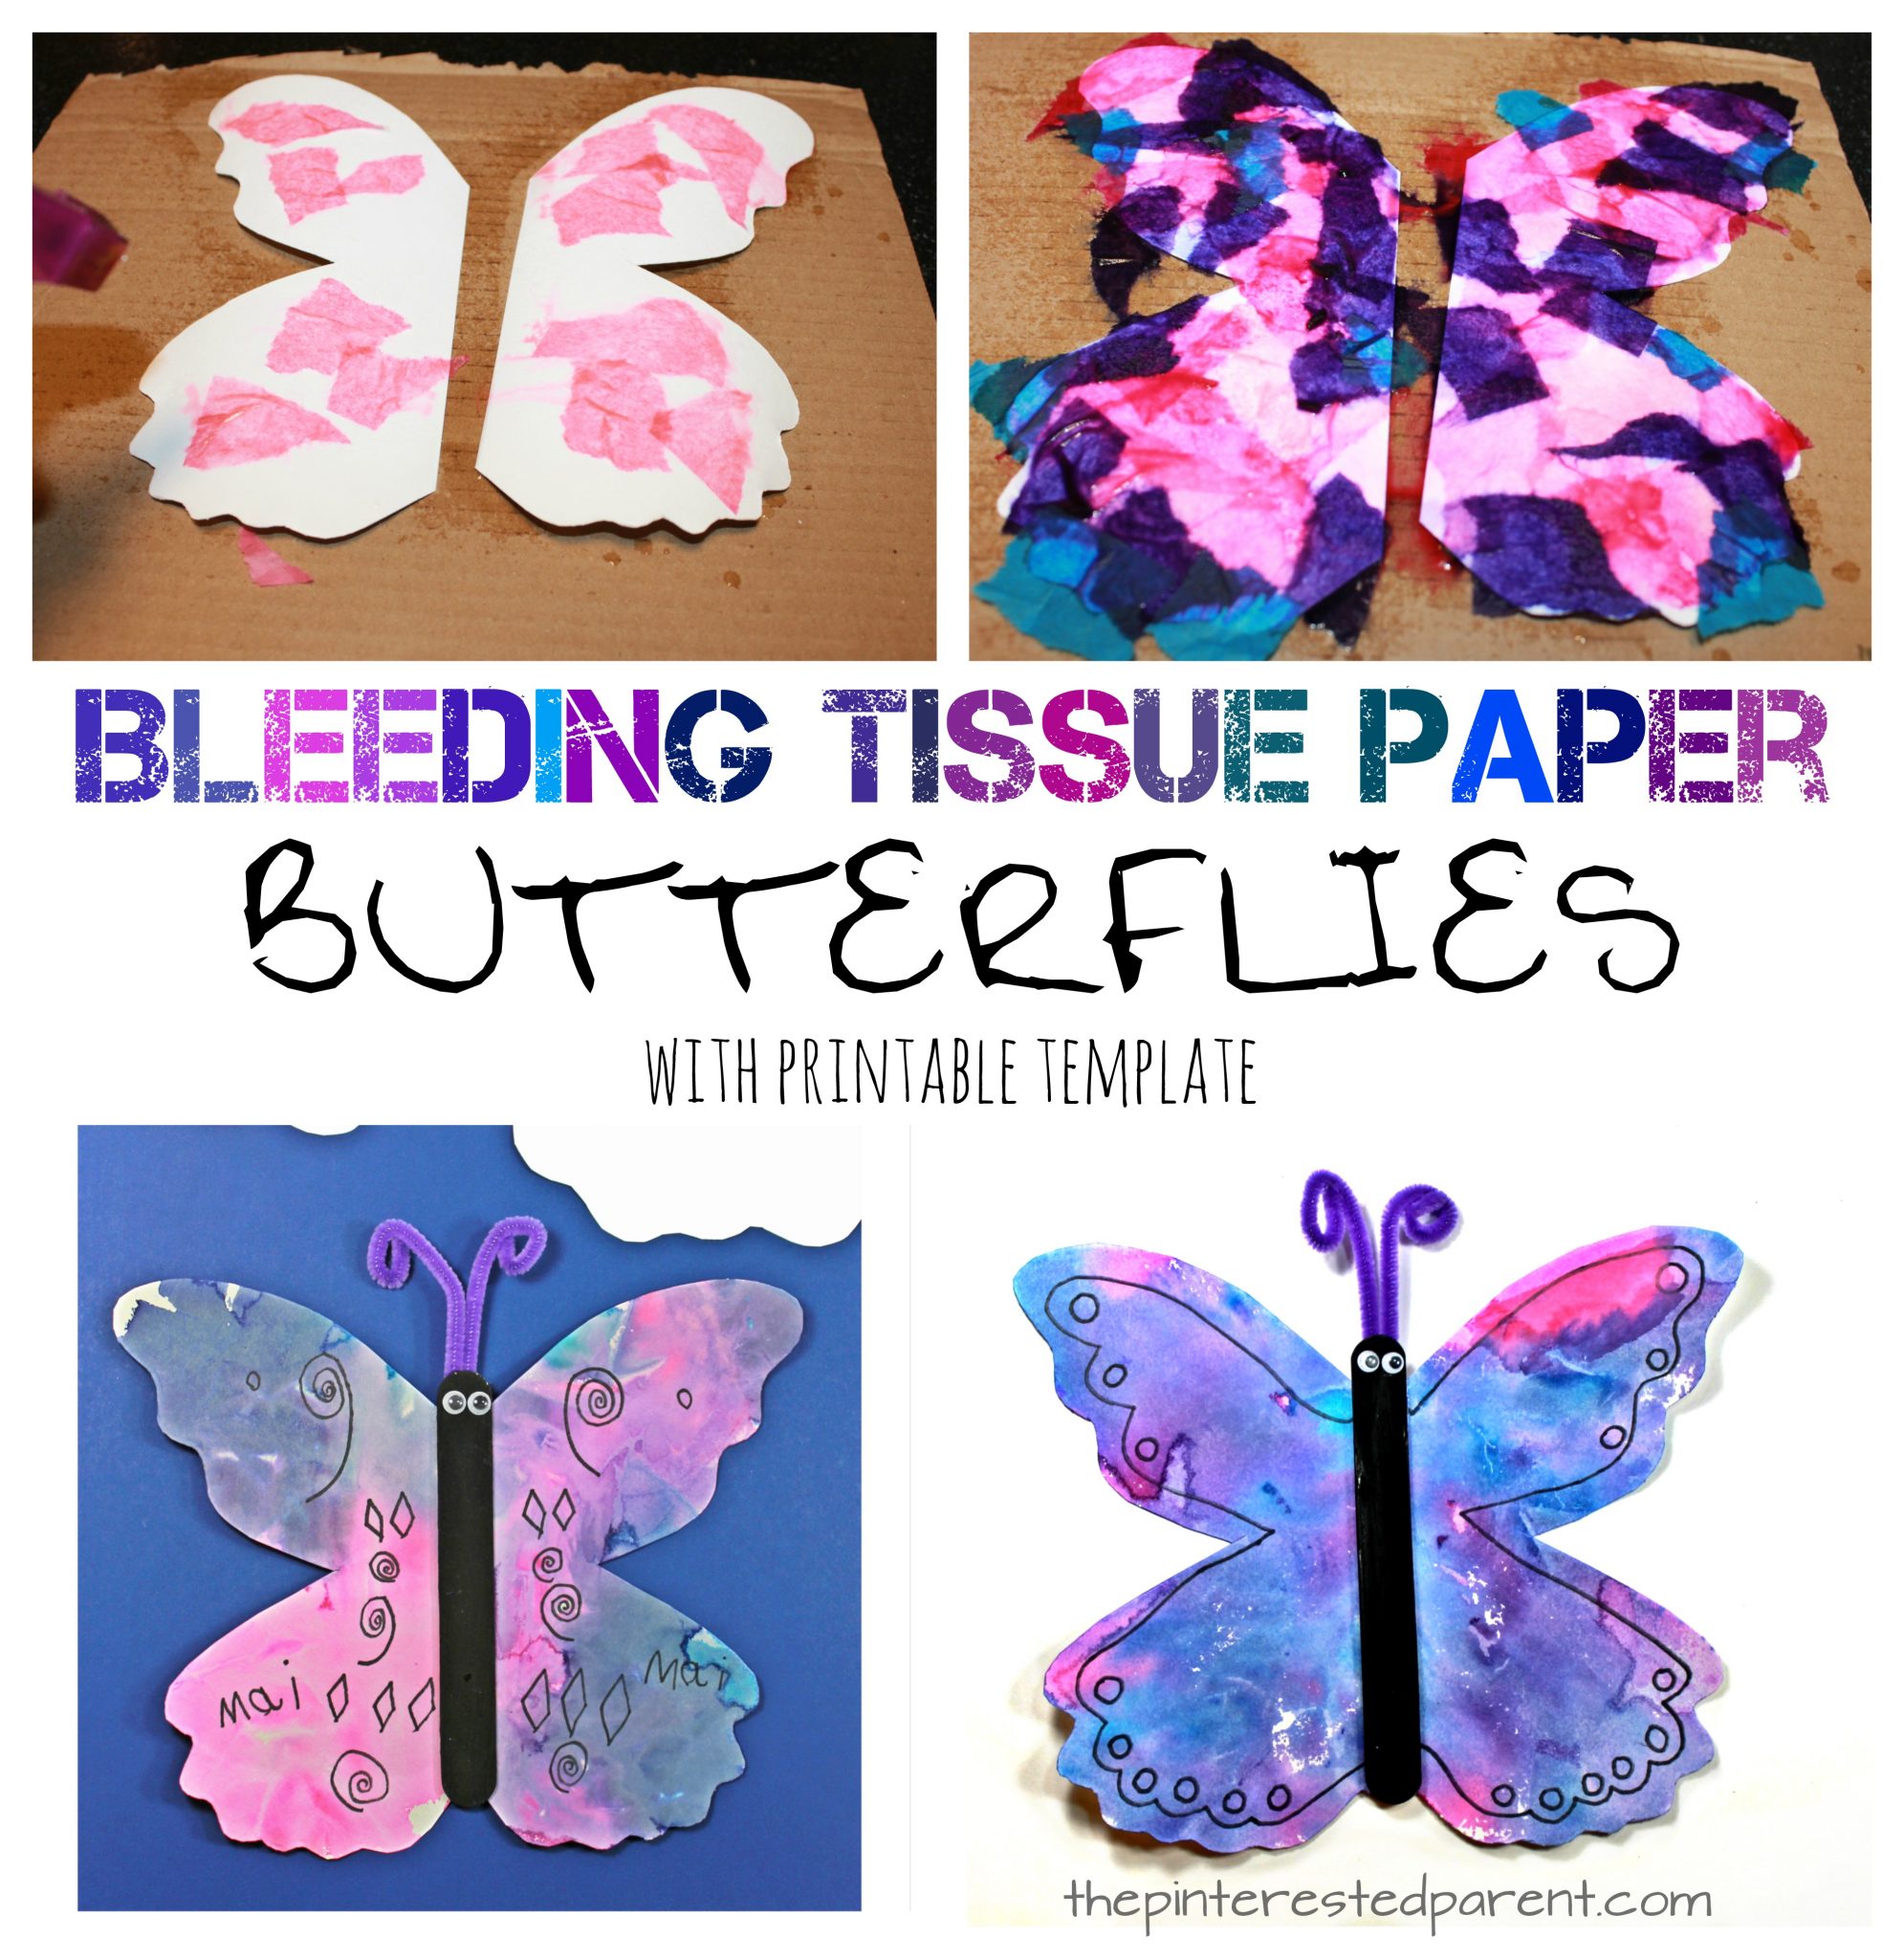 Bleeding tissue paper painted butterflies with a free printable template. Kid's spring and summer arts and crafts